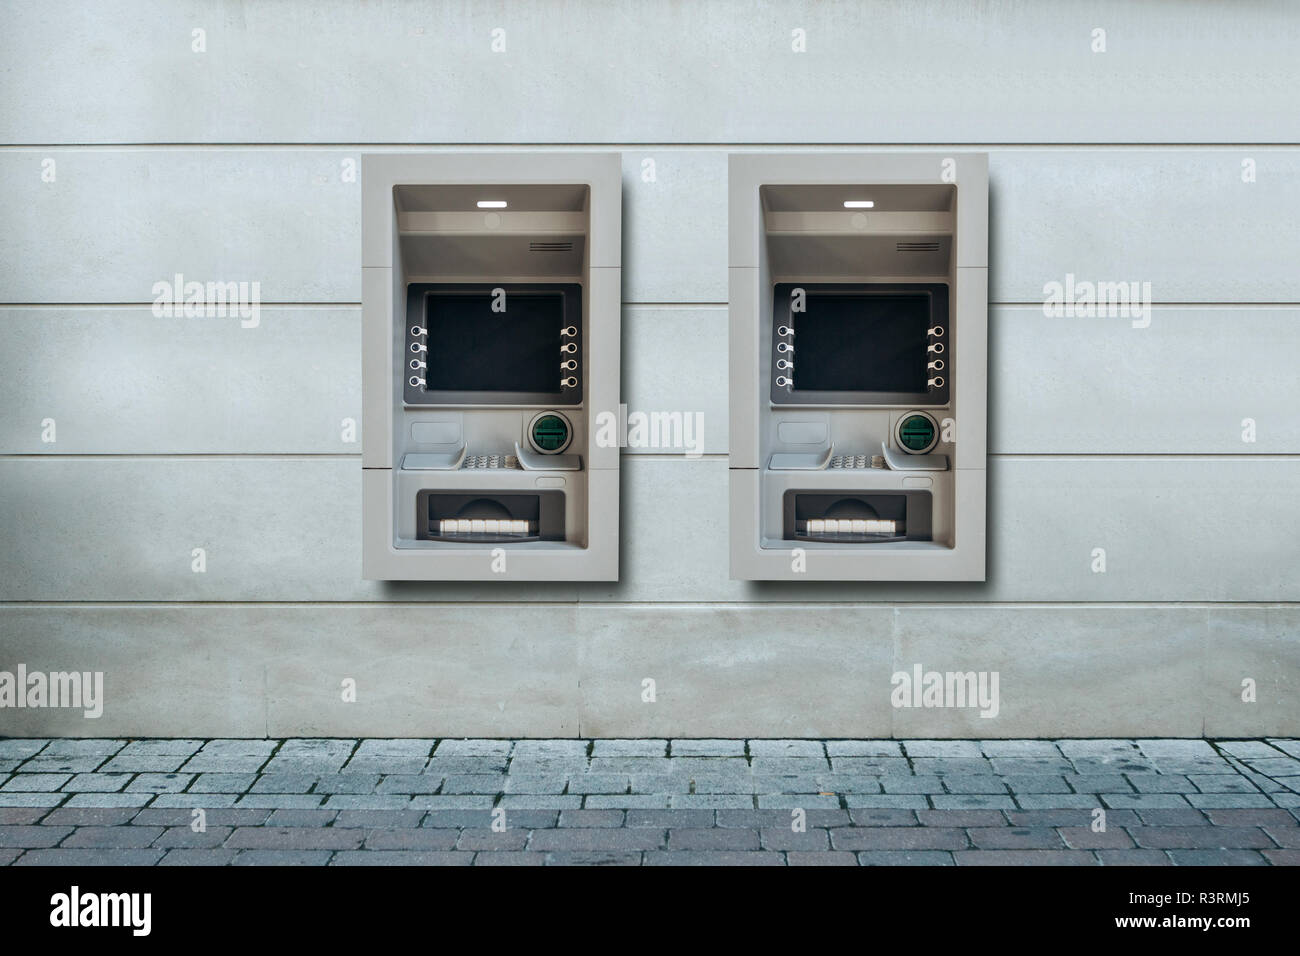 Modern street ATMs for withdrawal of money and other financial transactions. Stock Photo